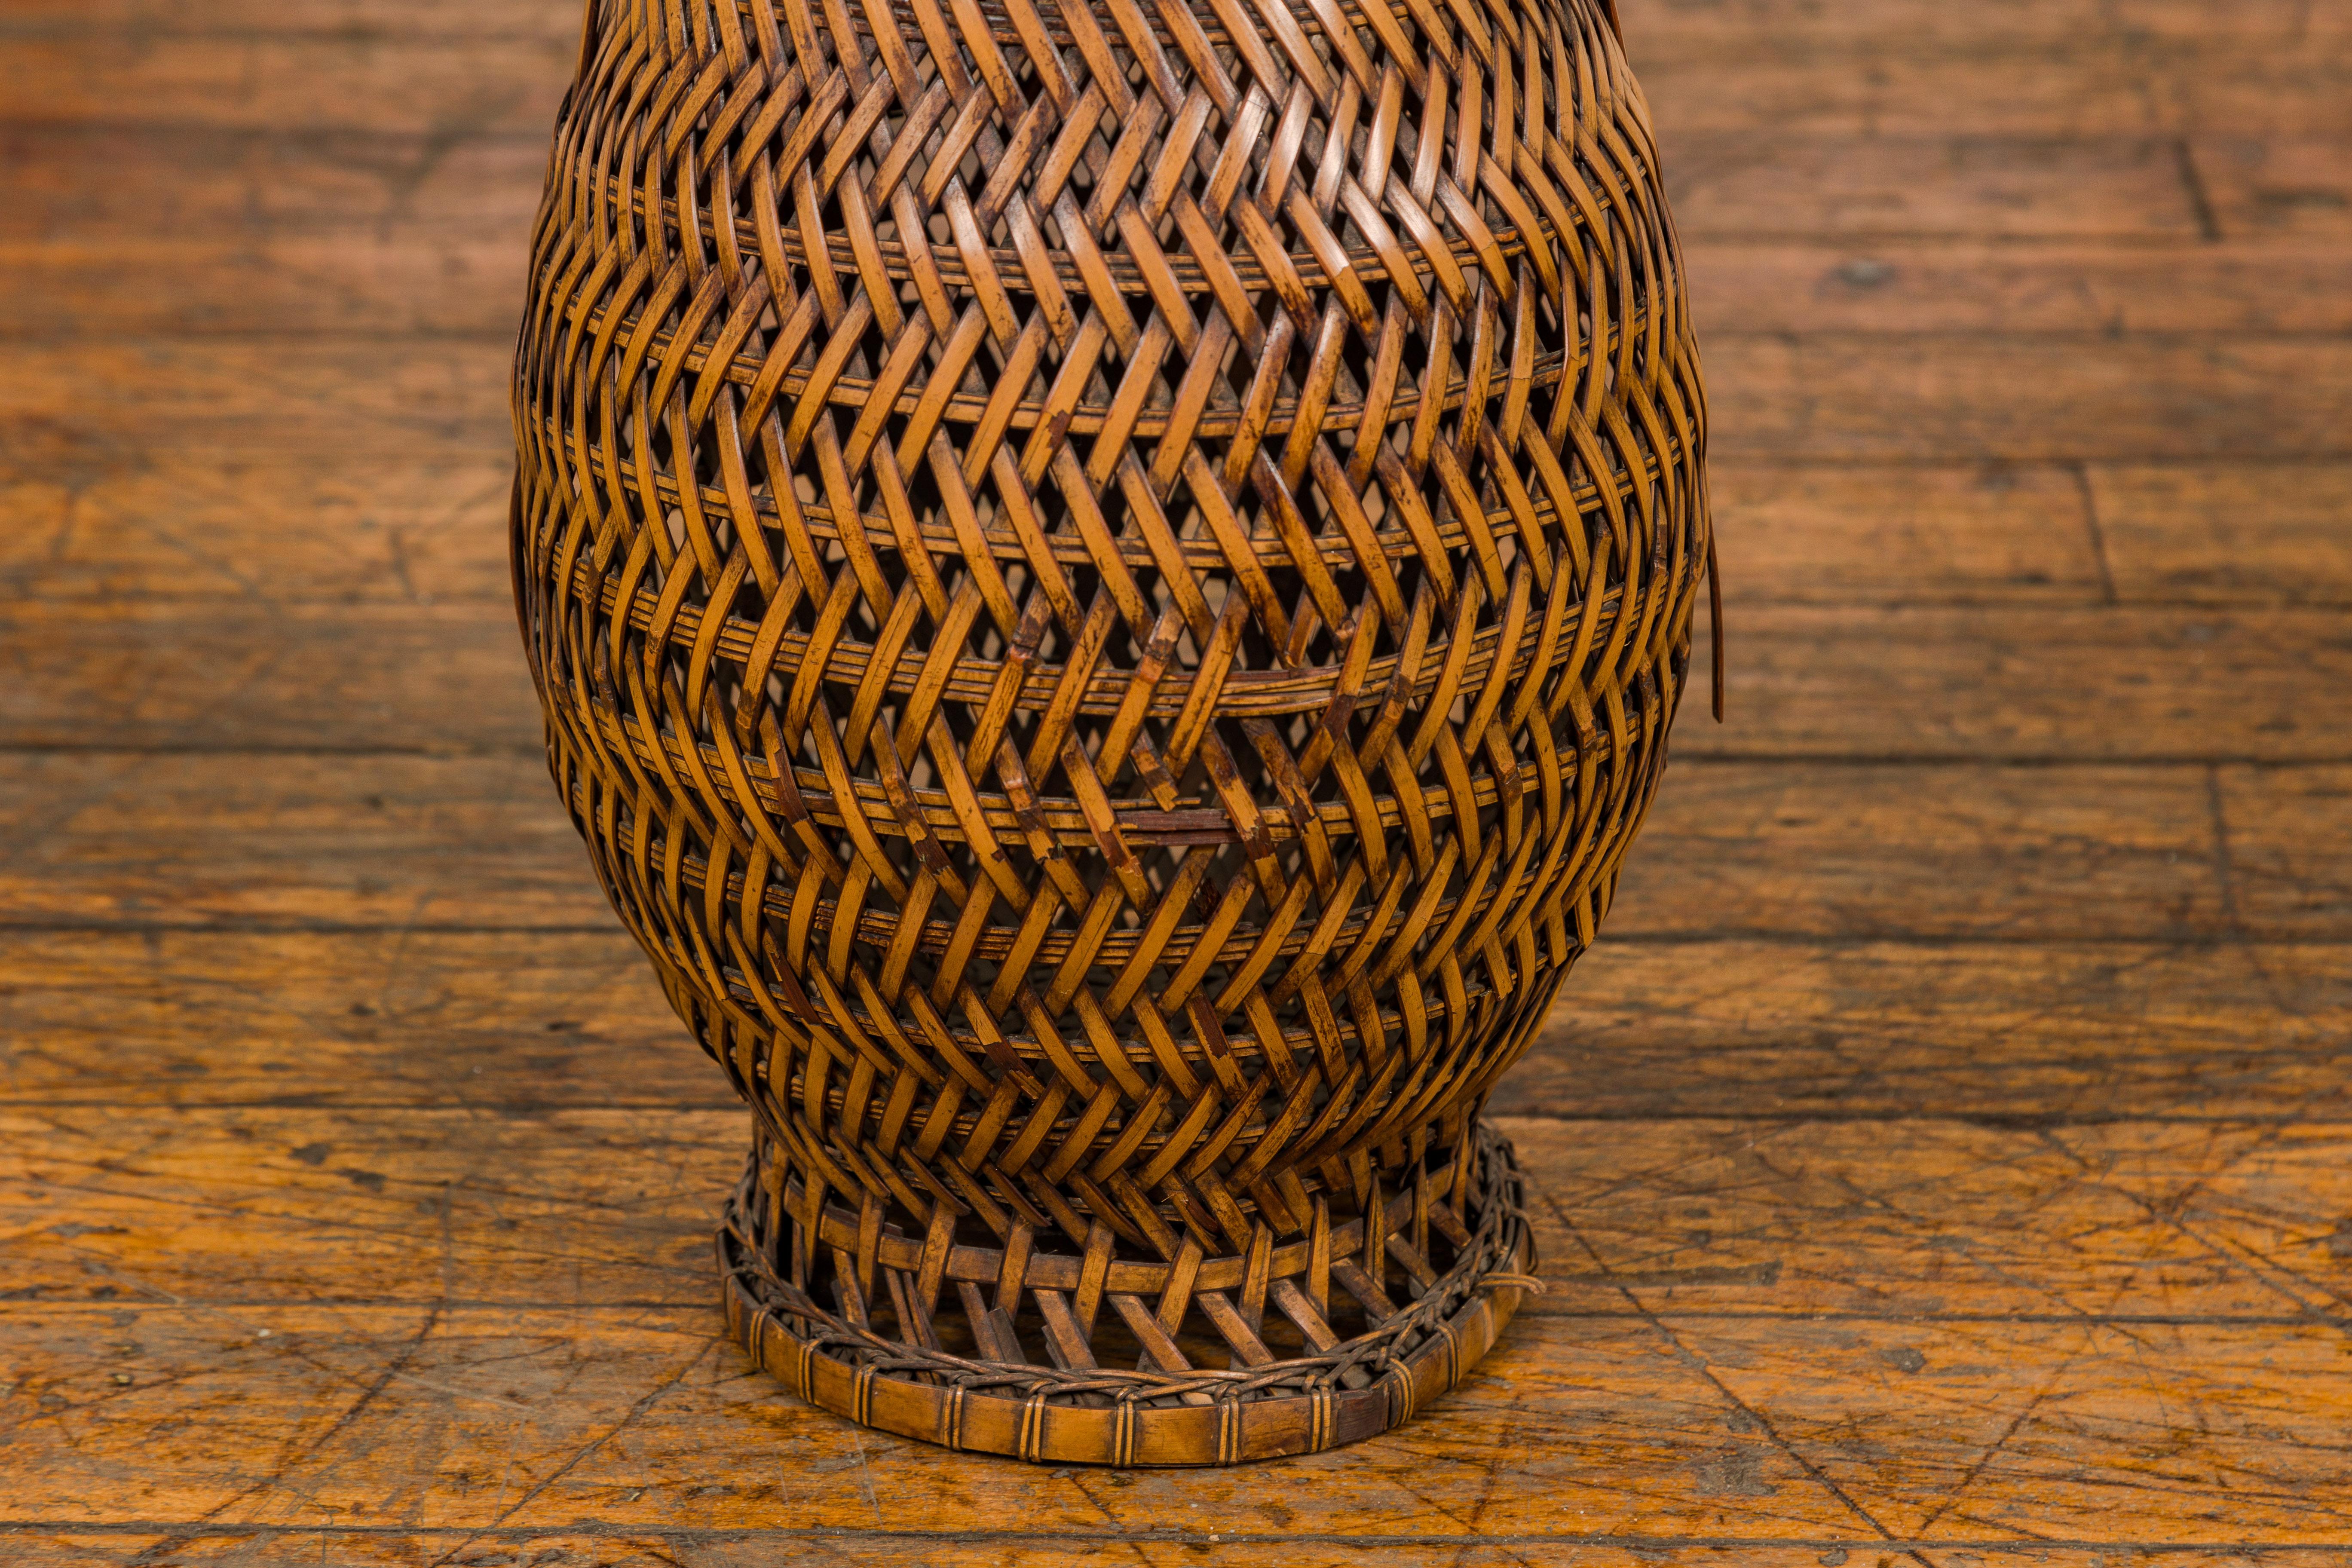 Antique Japanese Woven Bamboo Ikebana Basket with Large Handle, circa 1900 For Sale 4